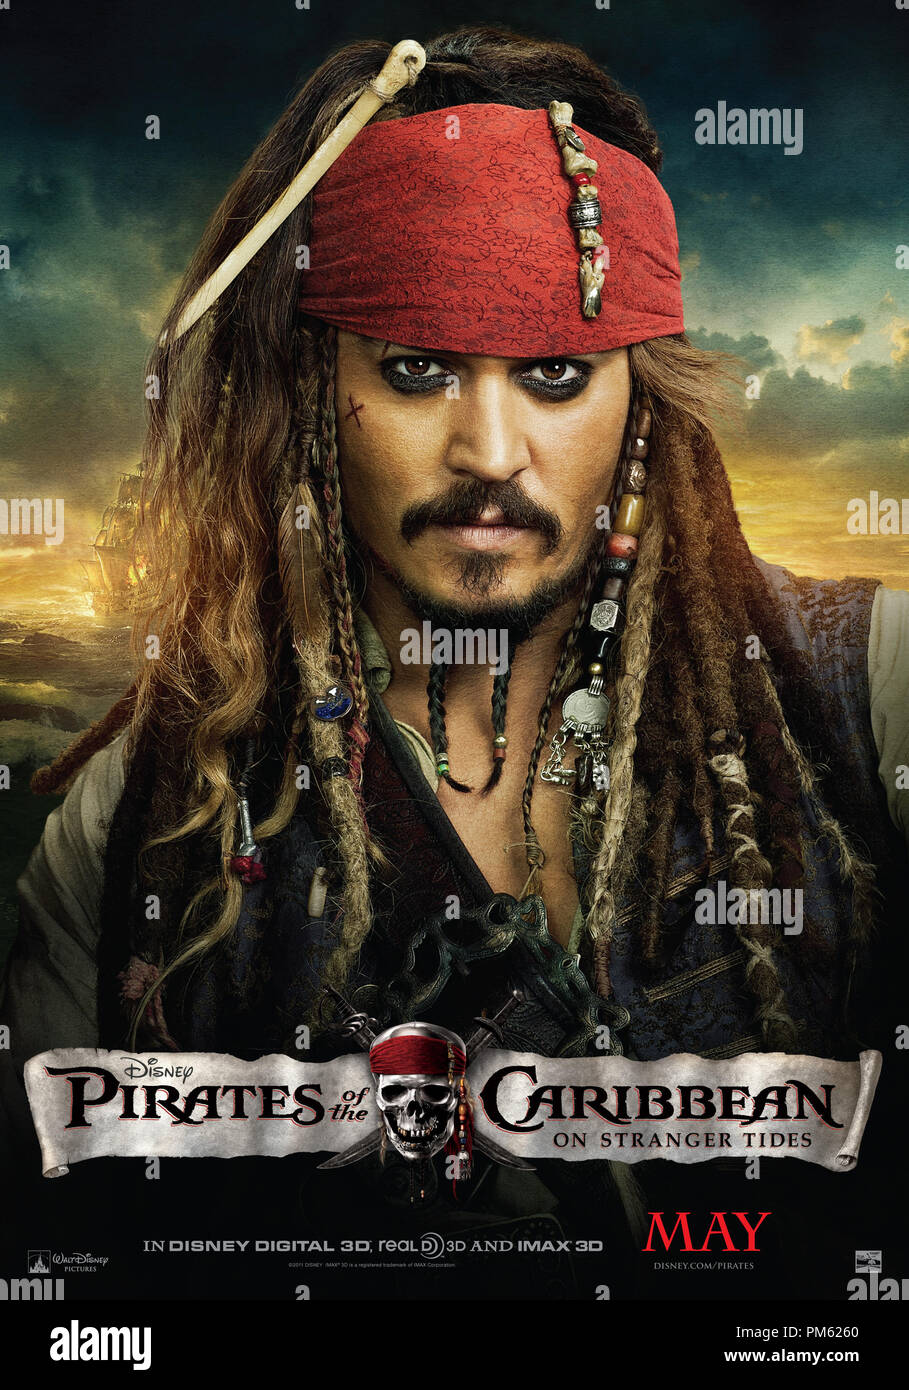 Pirates of caribbean poster hi-res stock and images - Alamy